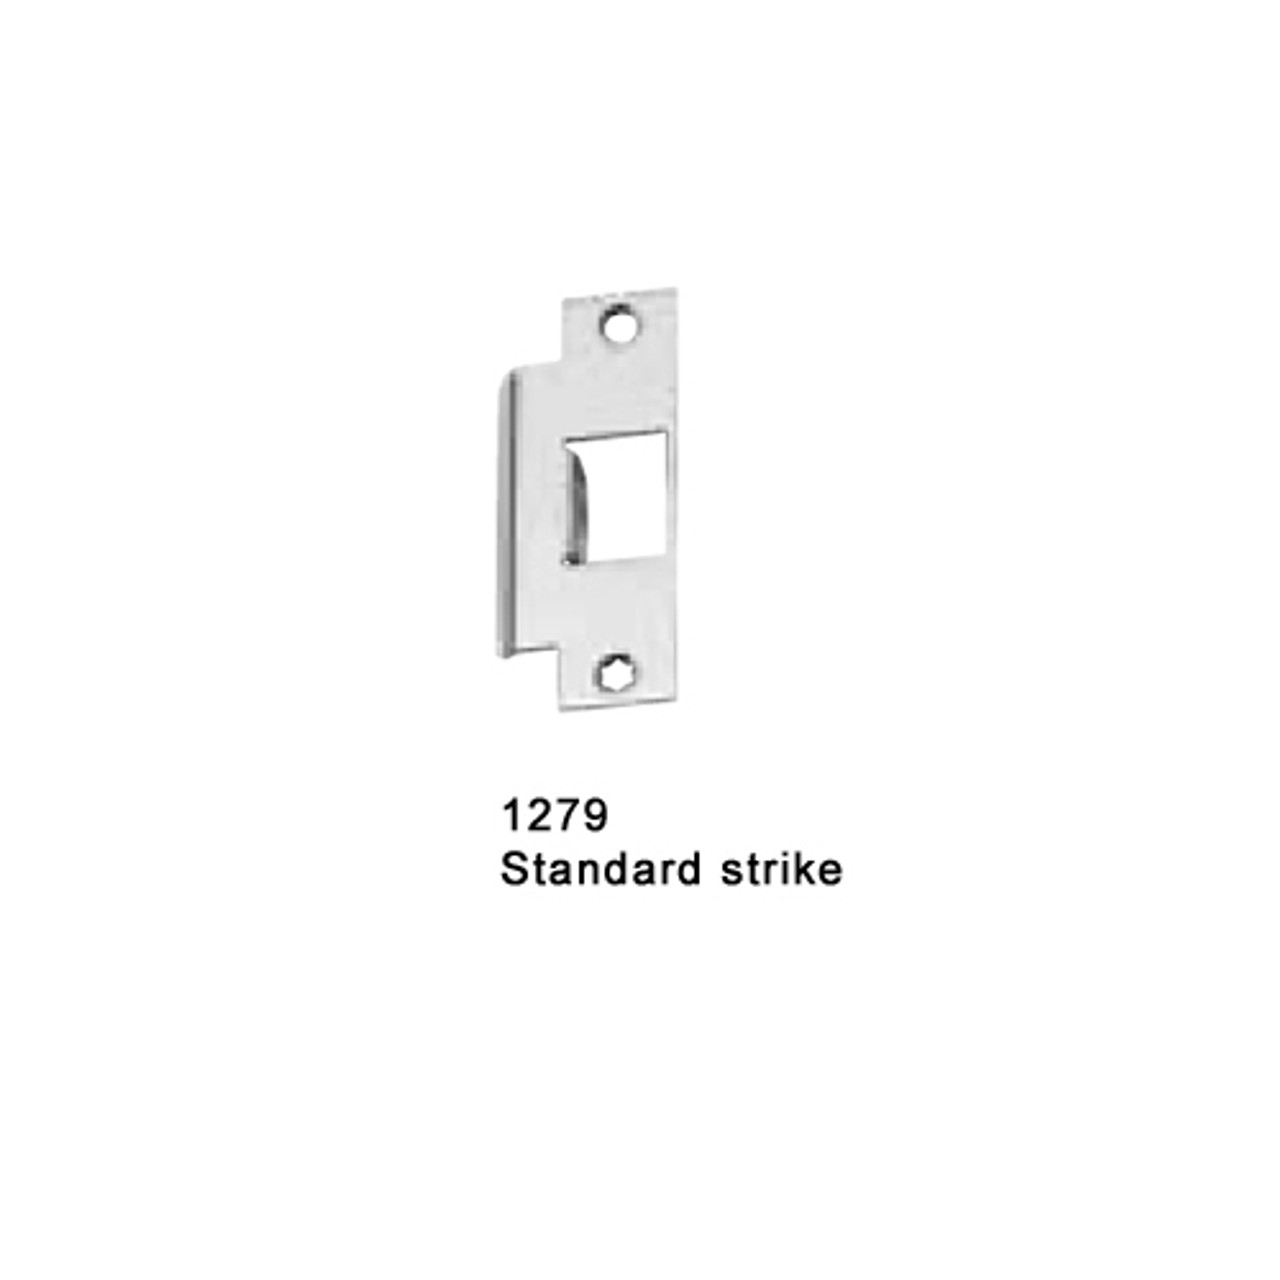 F-25-M-TP-US10-3-RHR Falcon 25 Series Fire Rated Mortise Lock Devices with 512TP Thumbpiece Trim in Satin Bronze